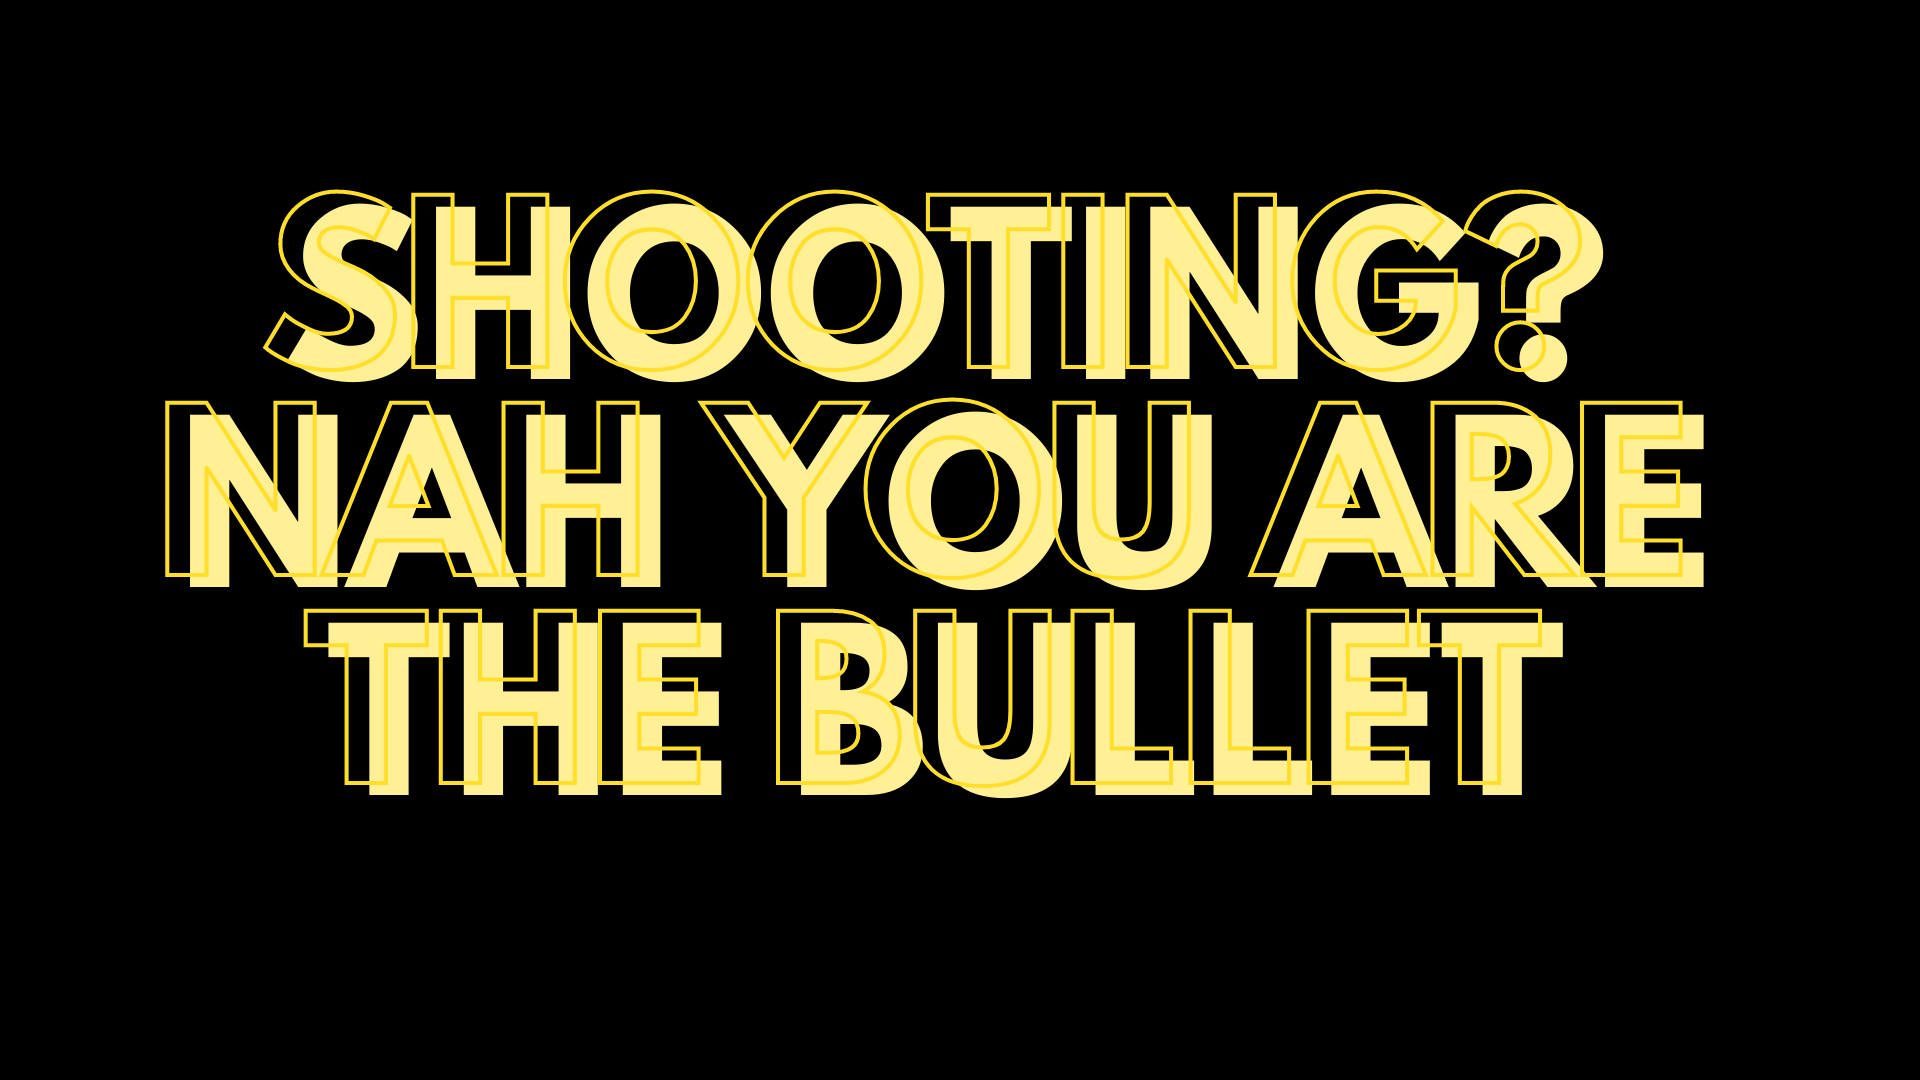 Shooting? Nah you are the bullet